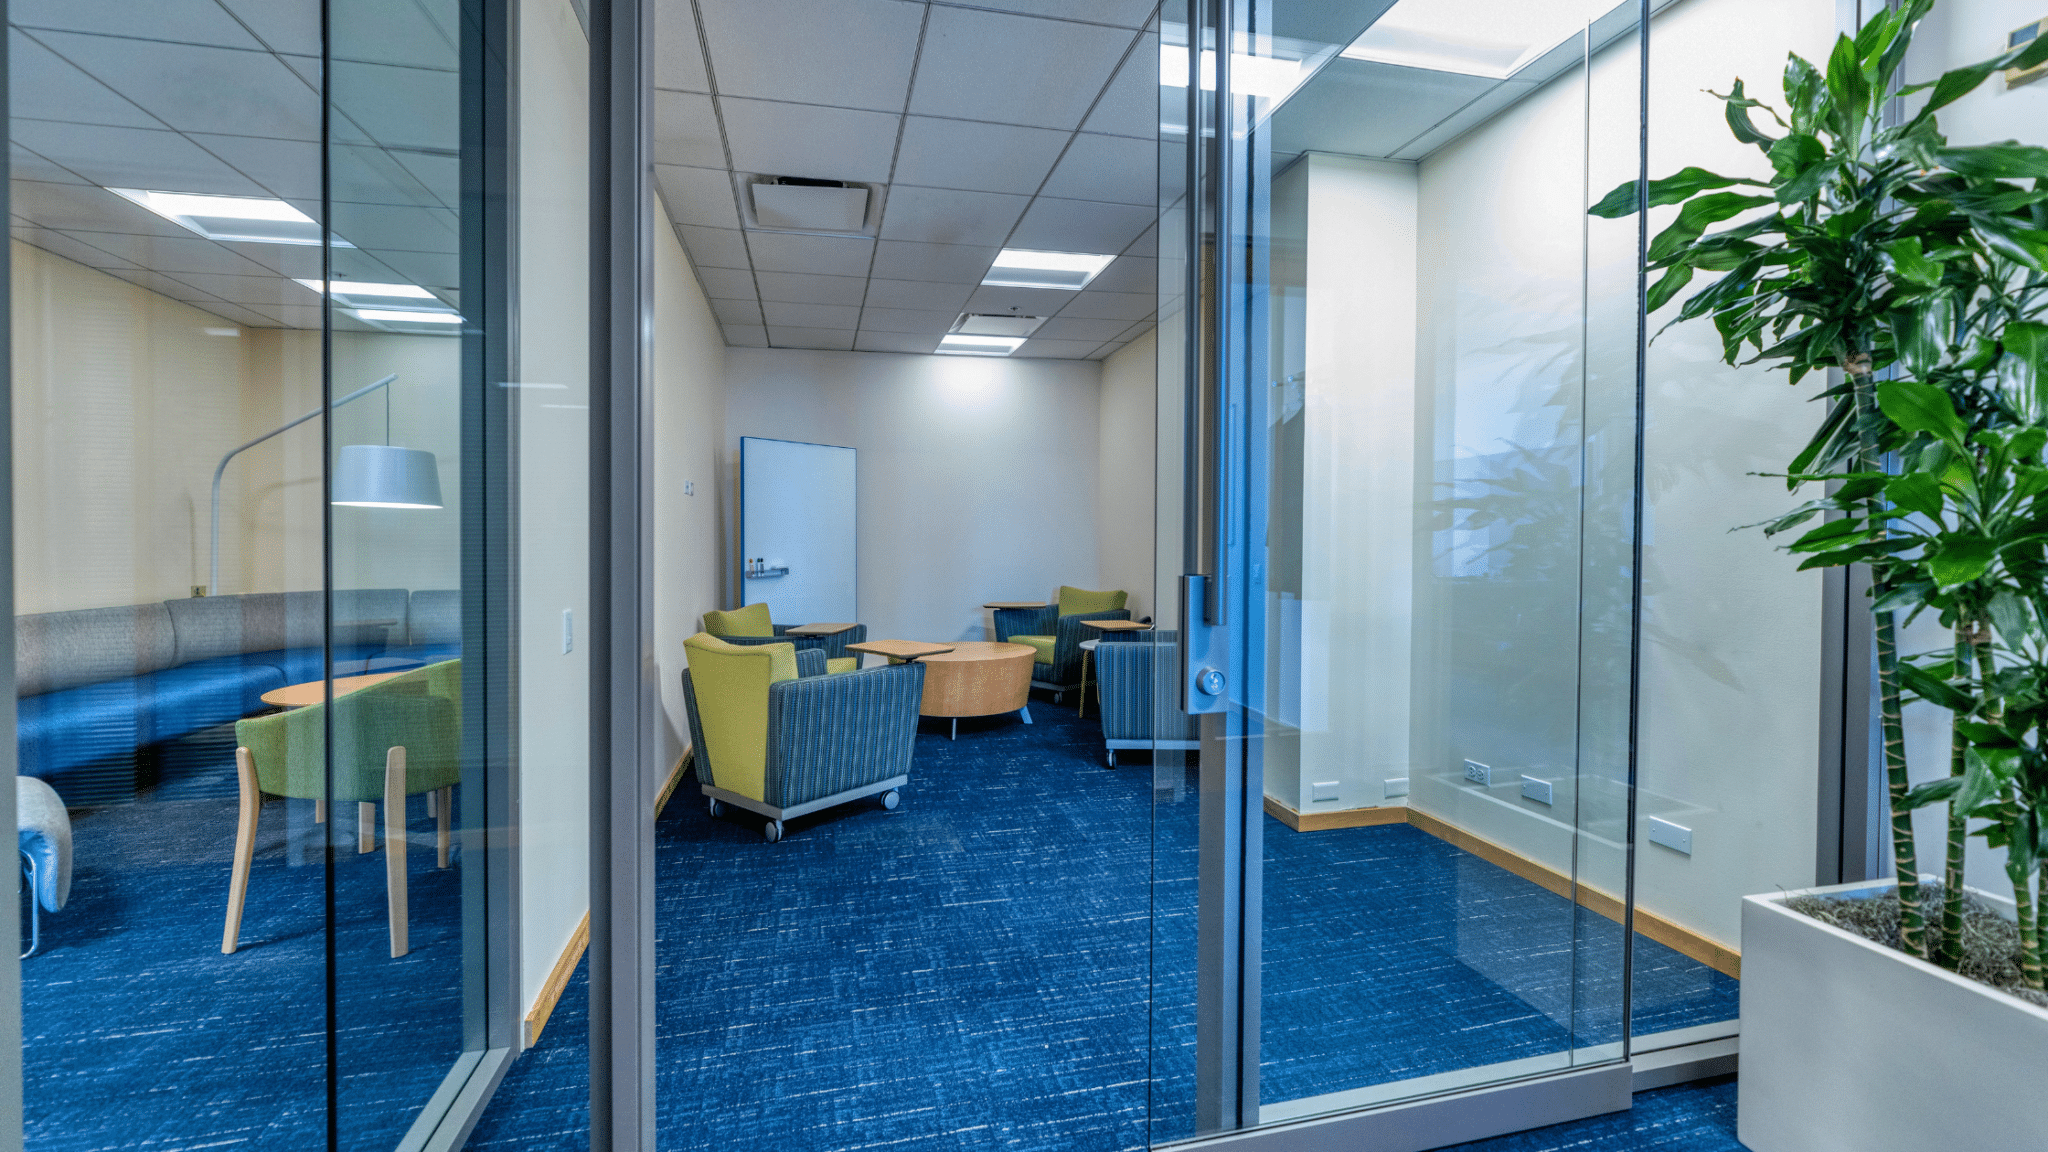 An office renovation depicting new blue carpets, glass doors, modern furniture, and a plant.